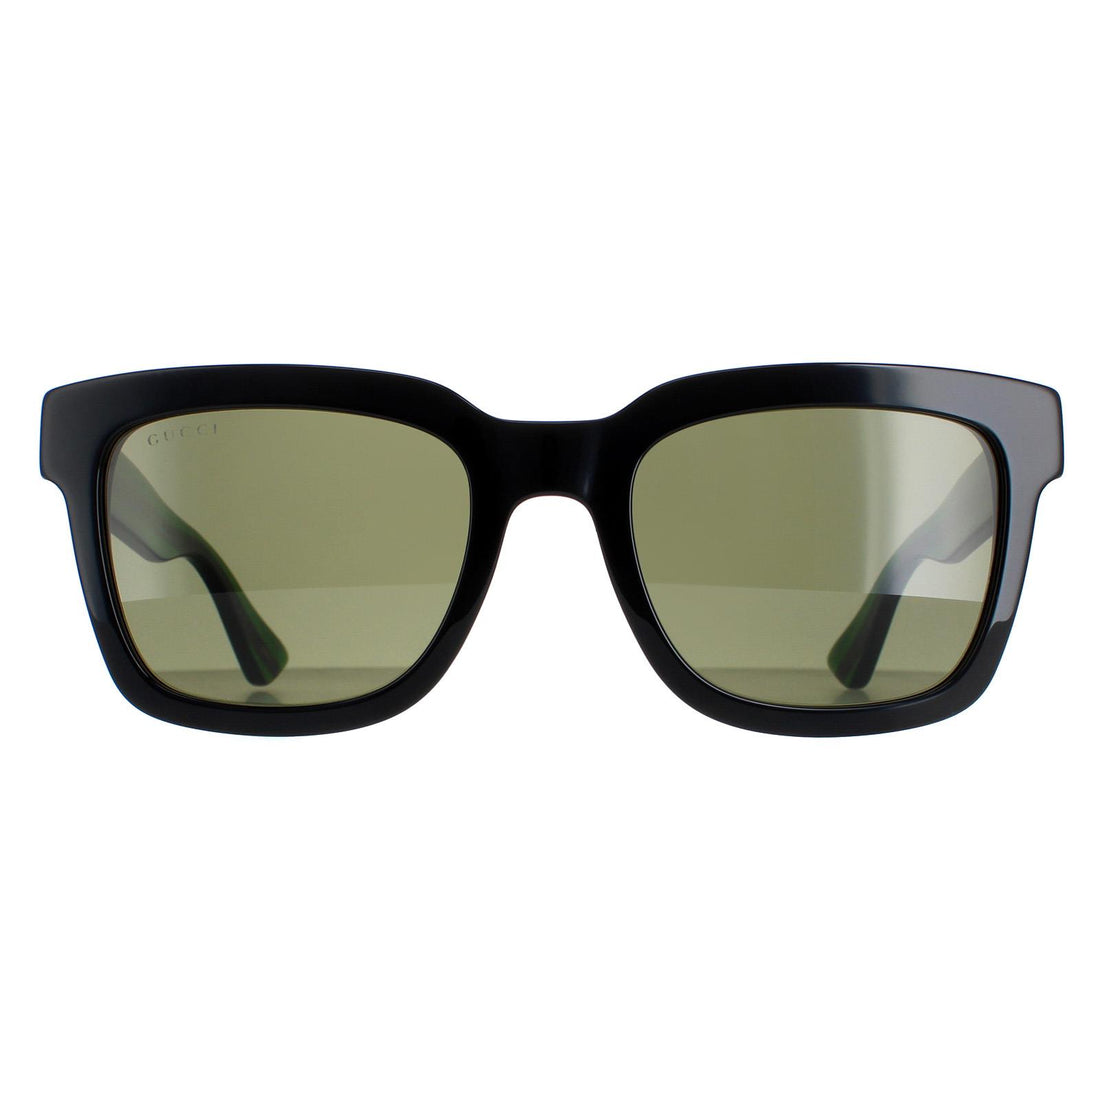 Gucci GG0001SN Sunglasses Black and Green With Red Stripe Green